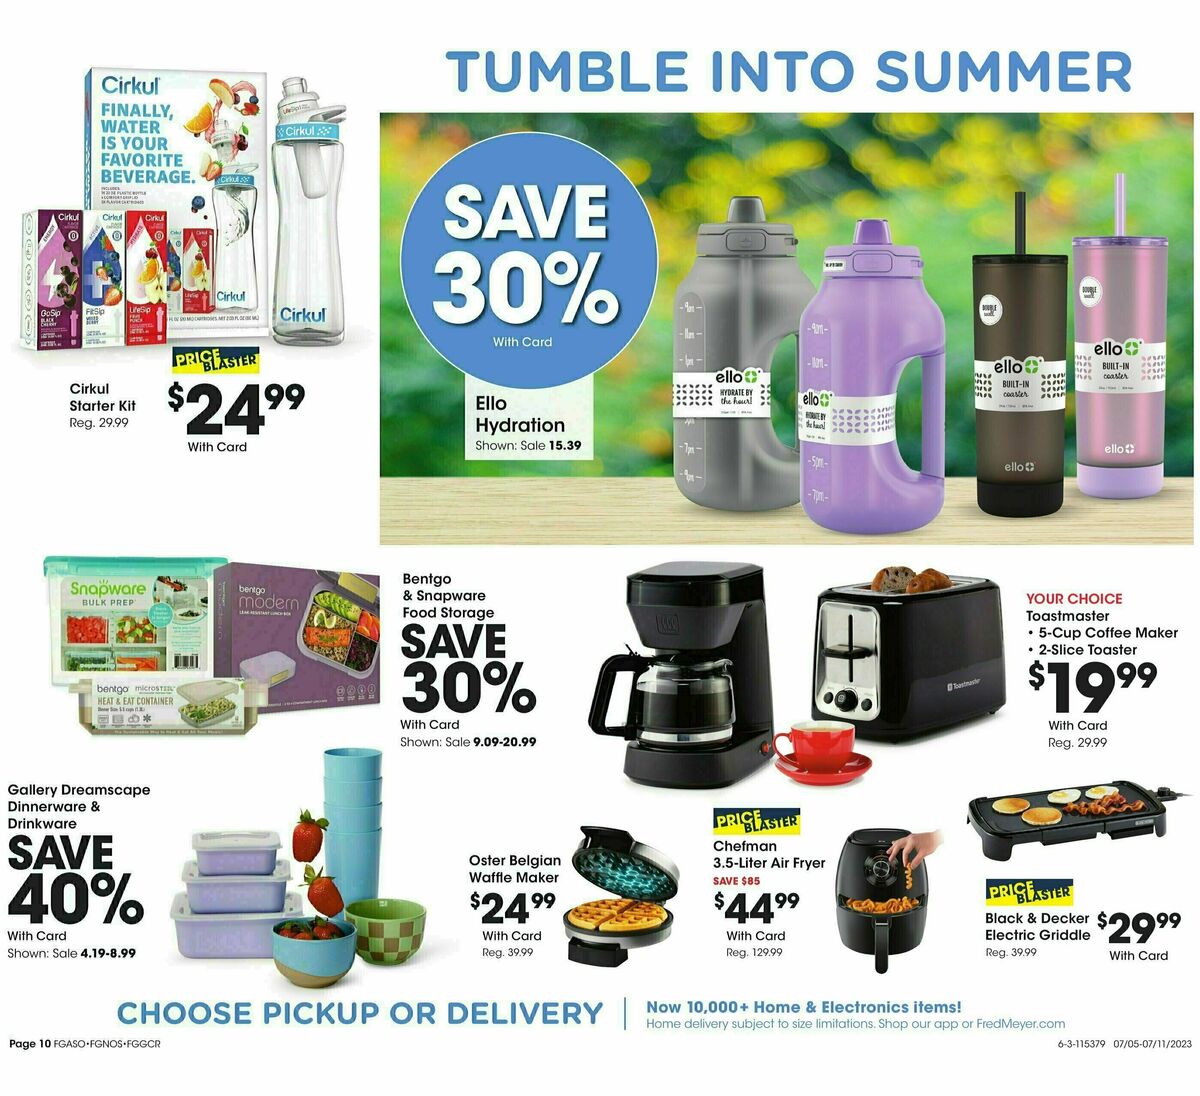 Fred Meyer Special Weekly Ad from July 5